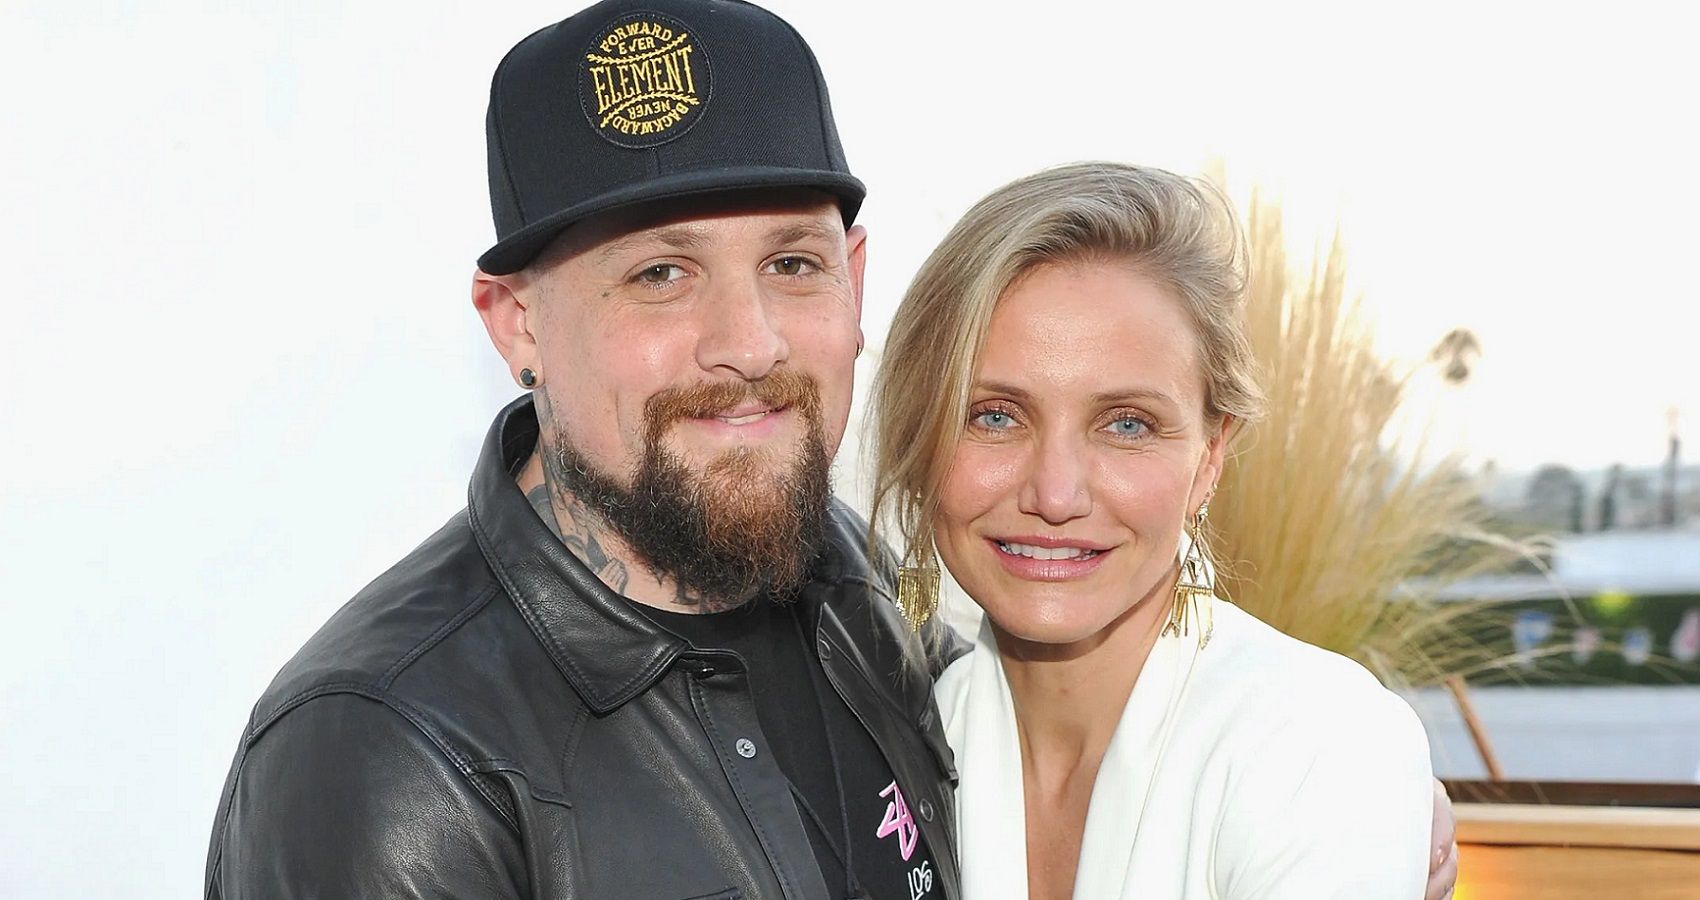 Cameron Diaz And Benji Madden looking very happy